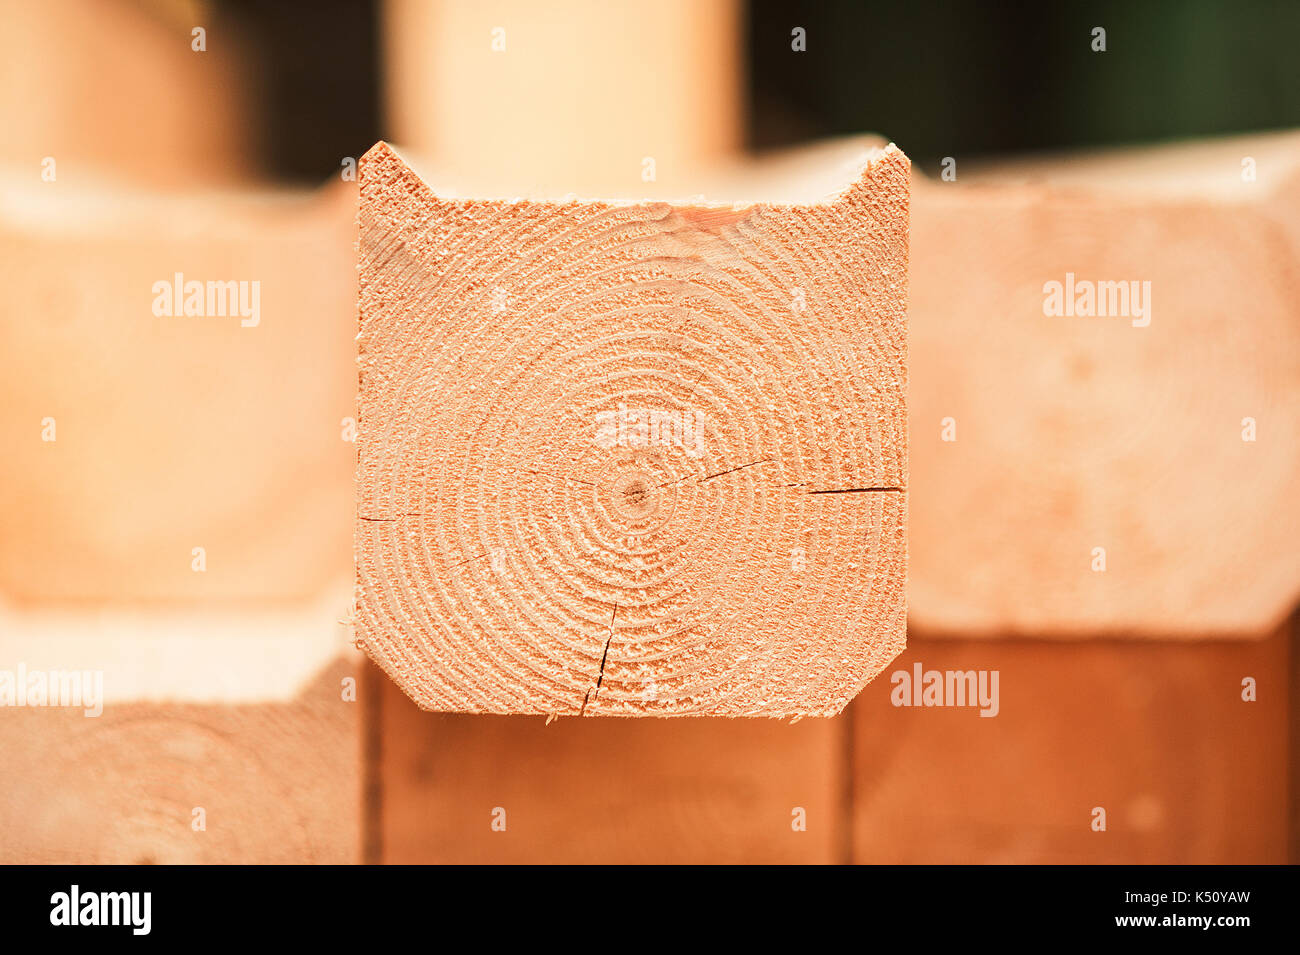 lumber industrial wood texture, timber butts background. Butt end of a processed wooden beam. in the center view Stock Photo